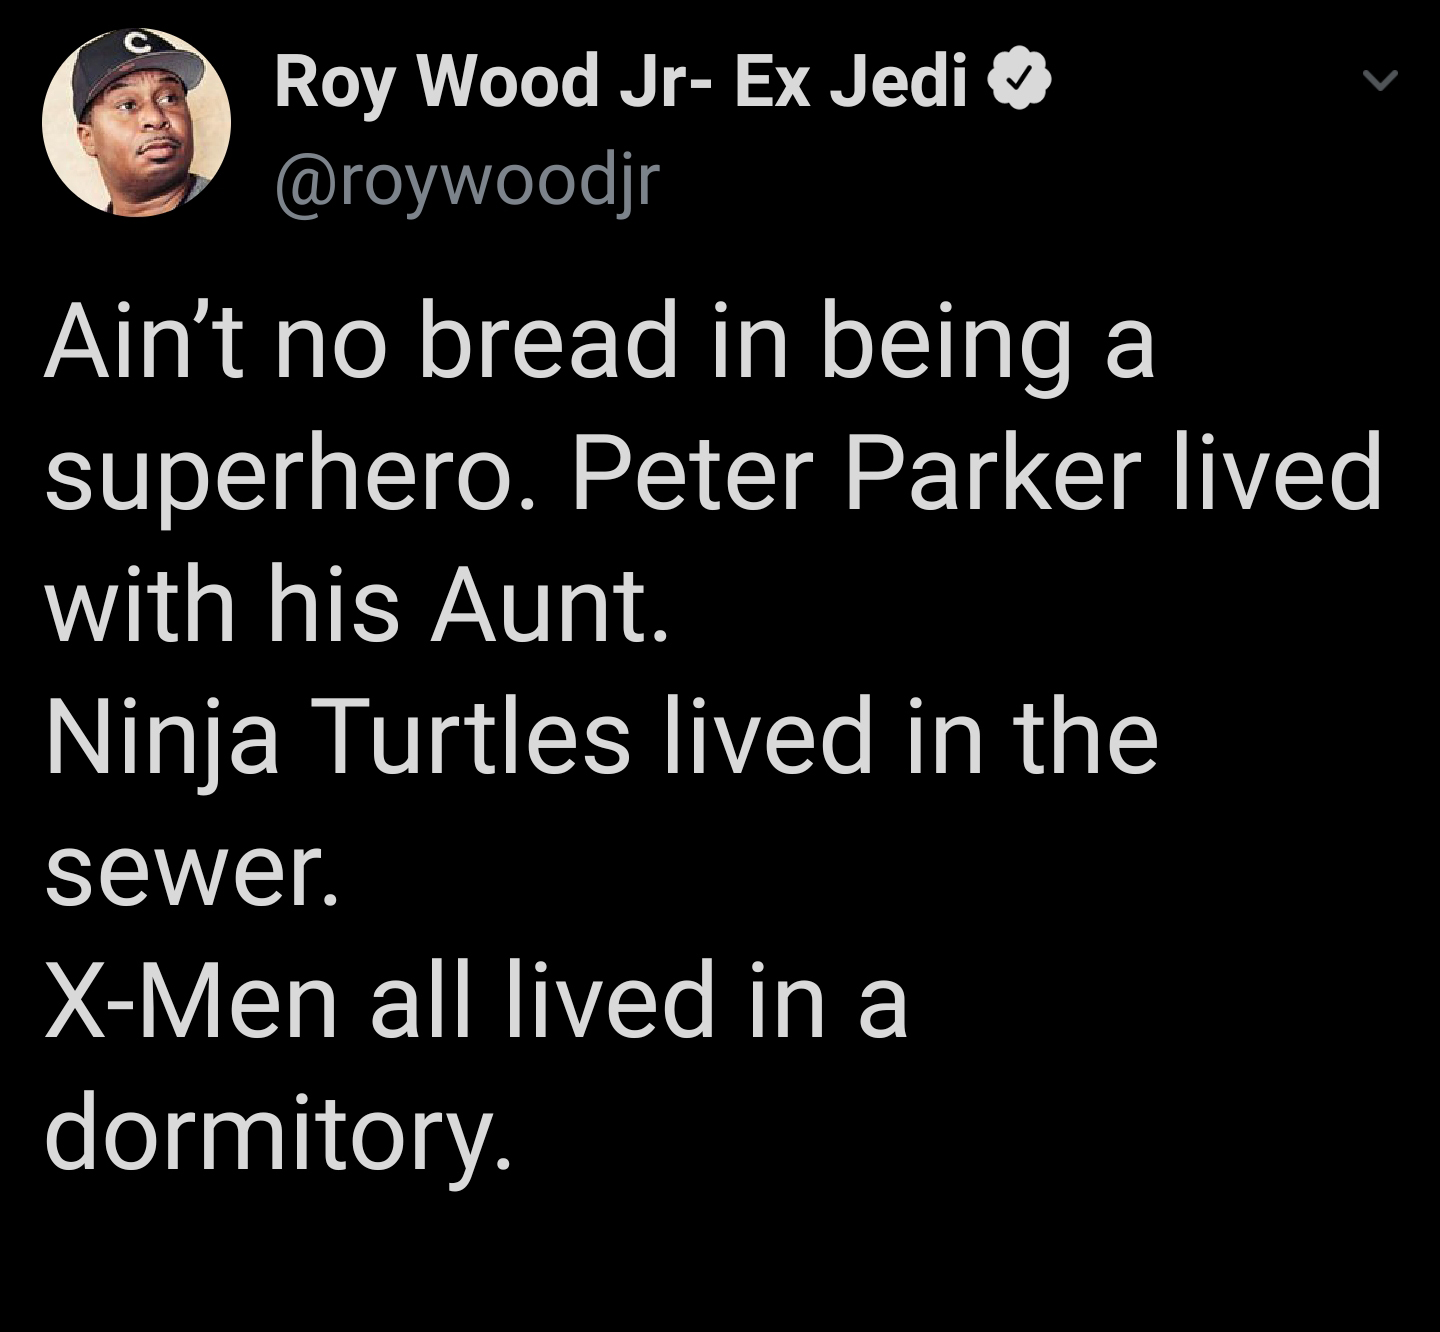 rihanna unfaithful lyrics - Roy Wood Jr Ex Jedi Ain't no bread in being a superhero. Peter Parker lived with his Aunt. Ninja Turtles lived in the sewer. XMen all lived in a dormitory.